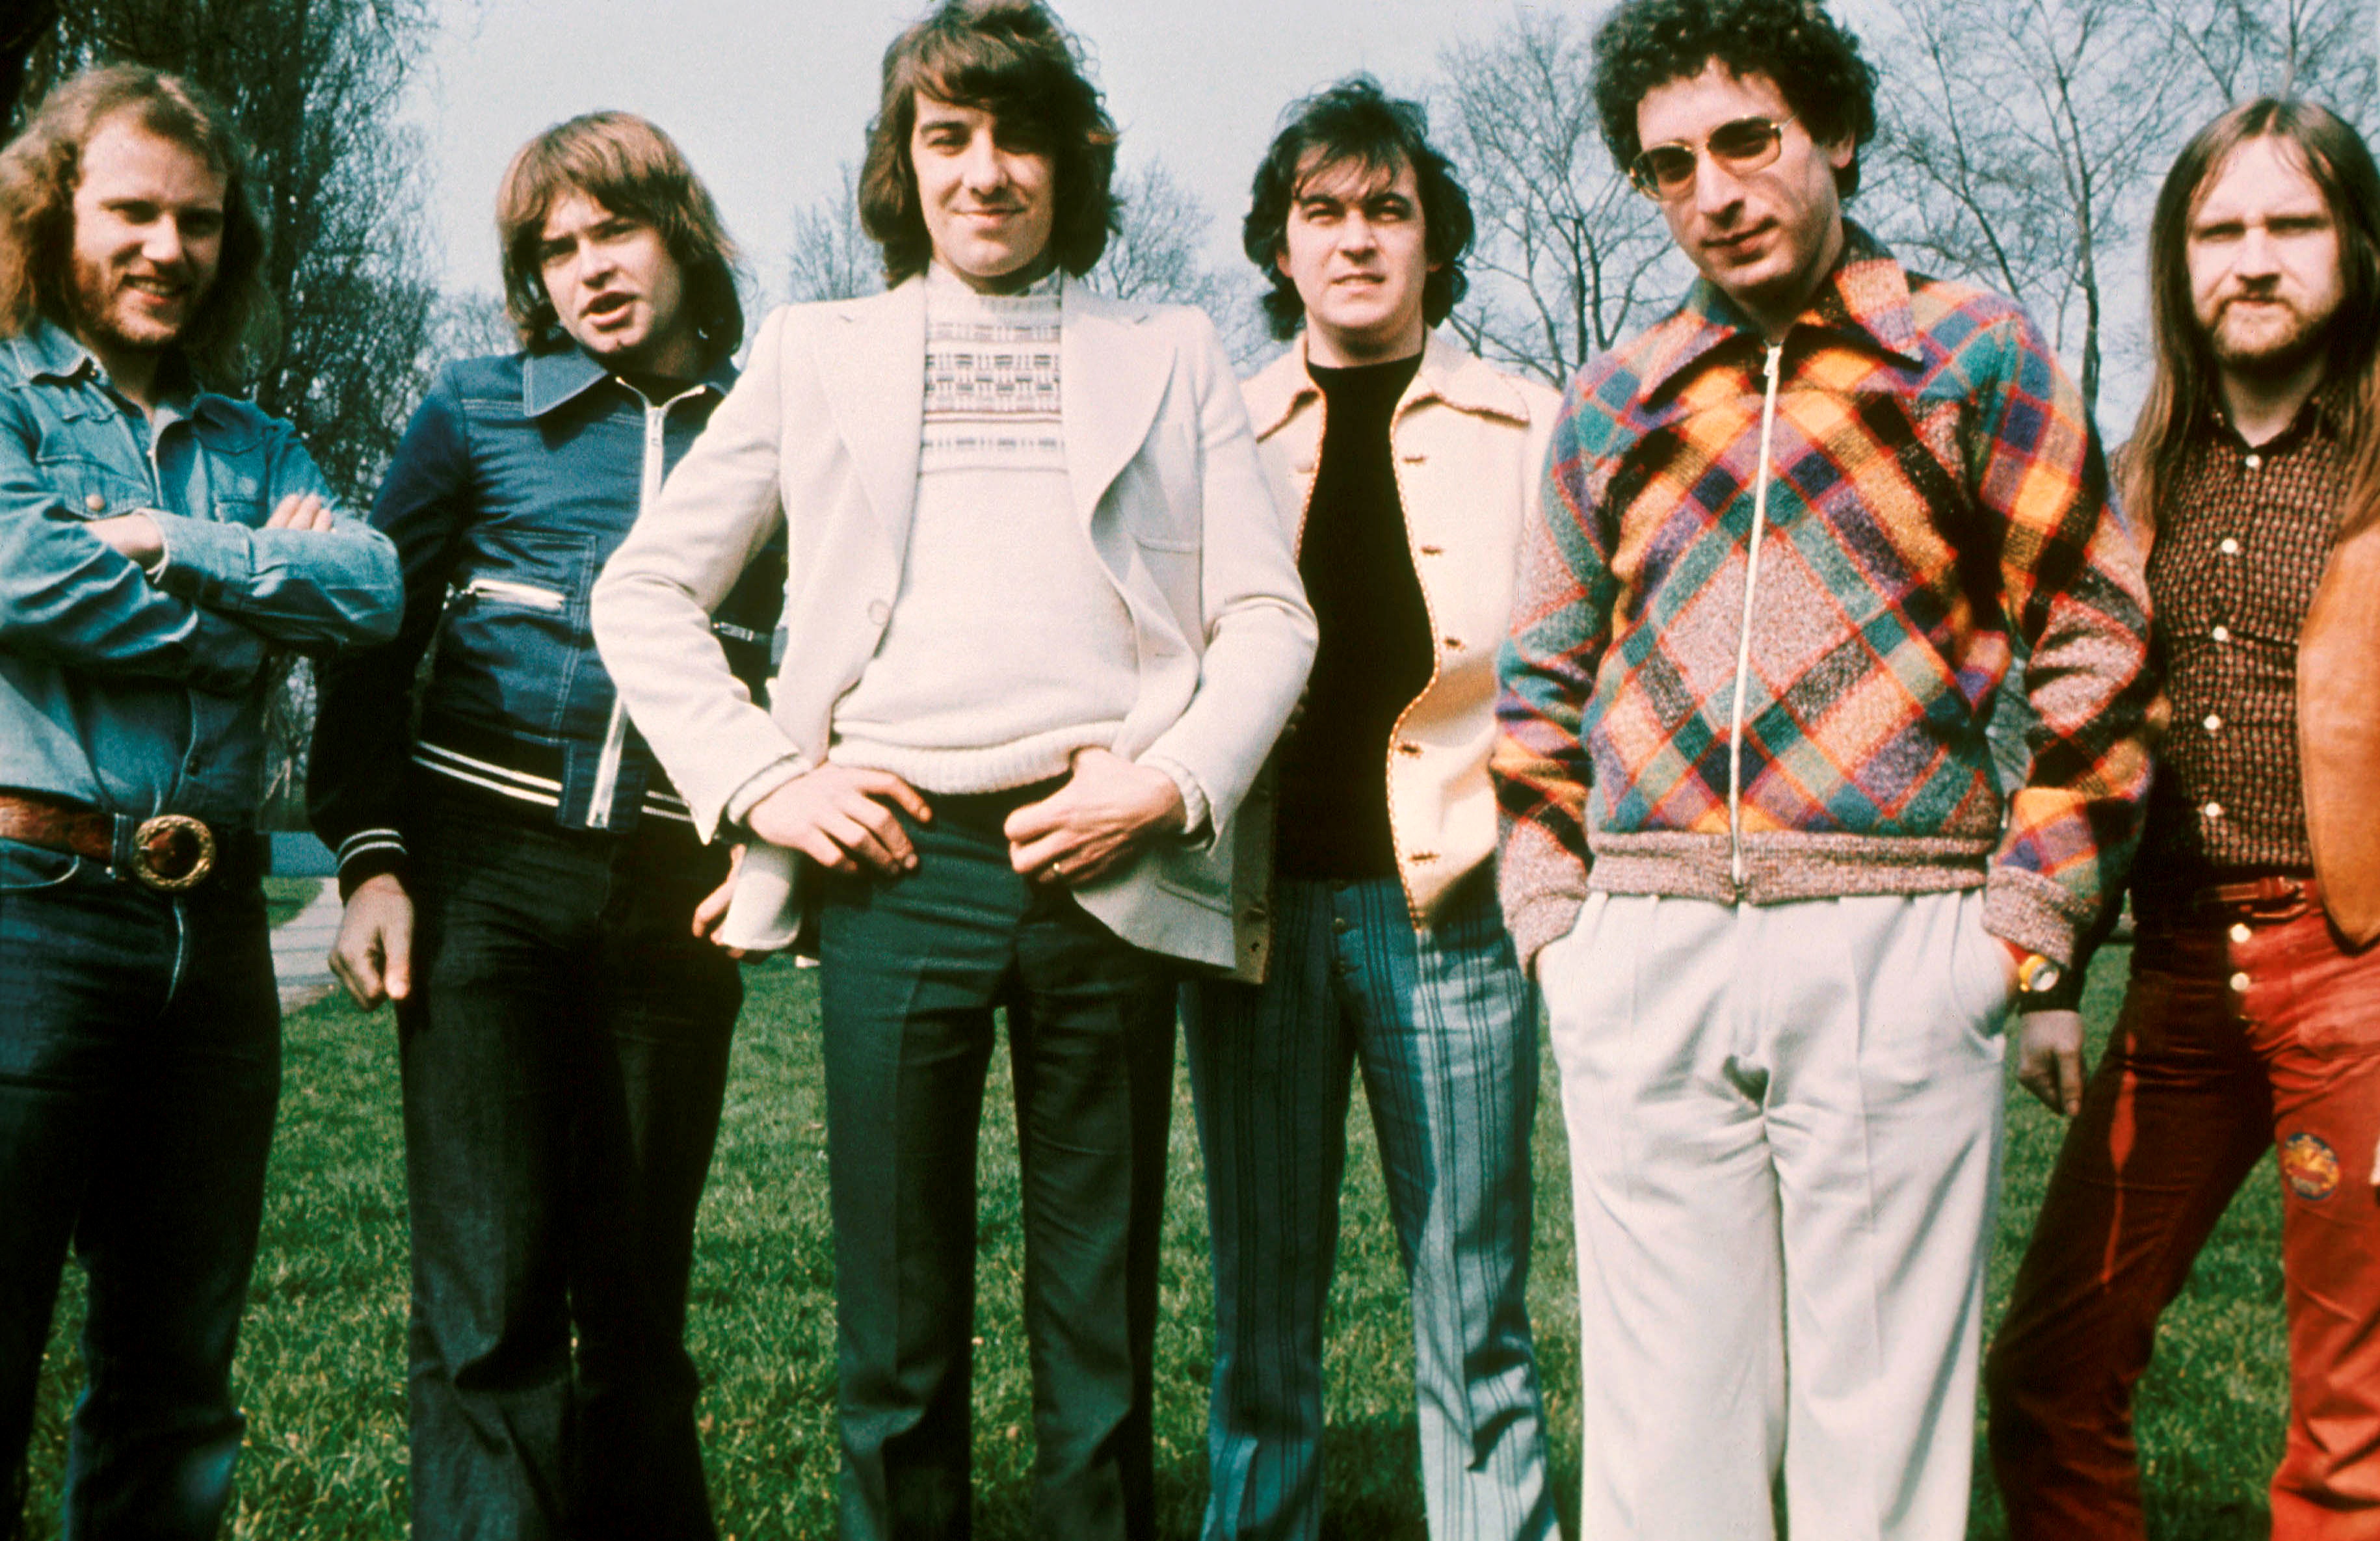 how old is procol harum